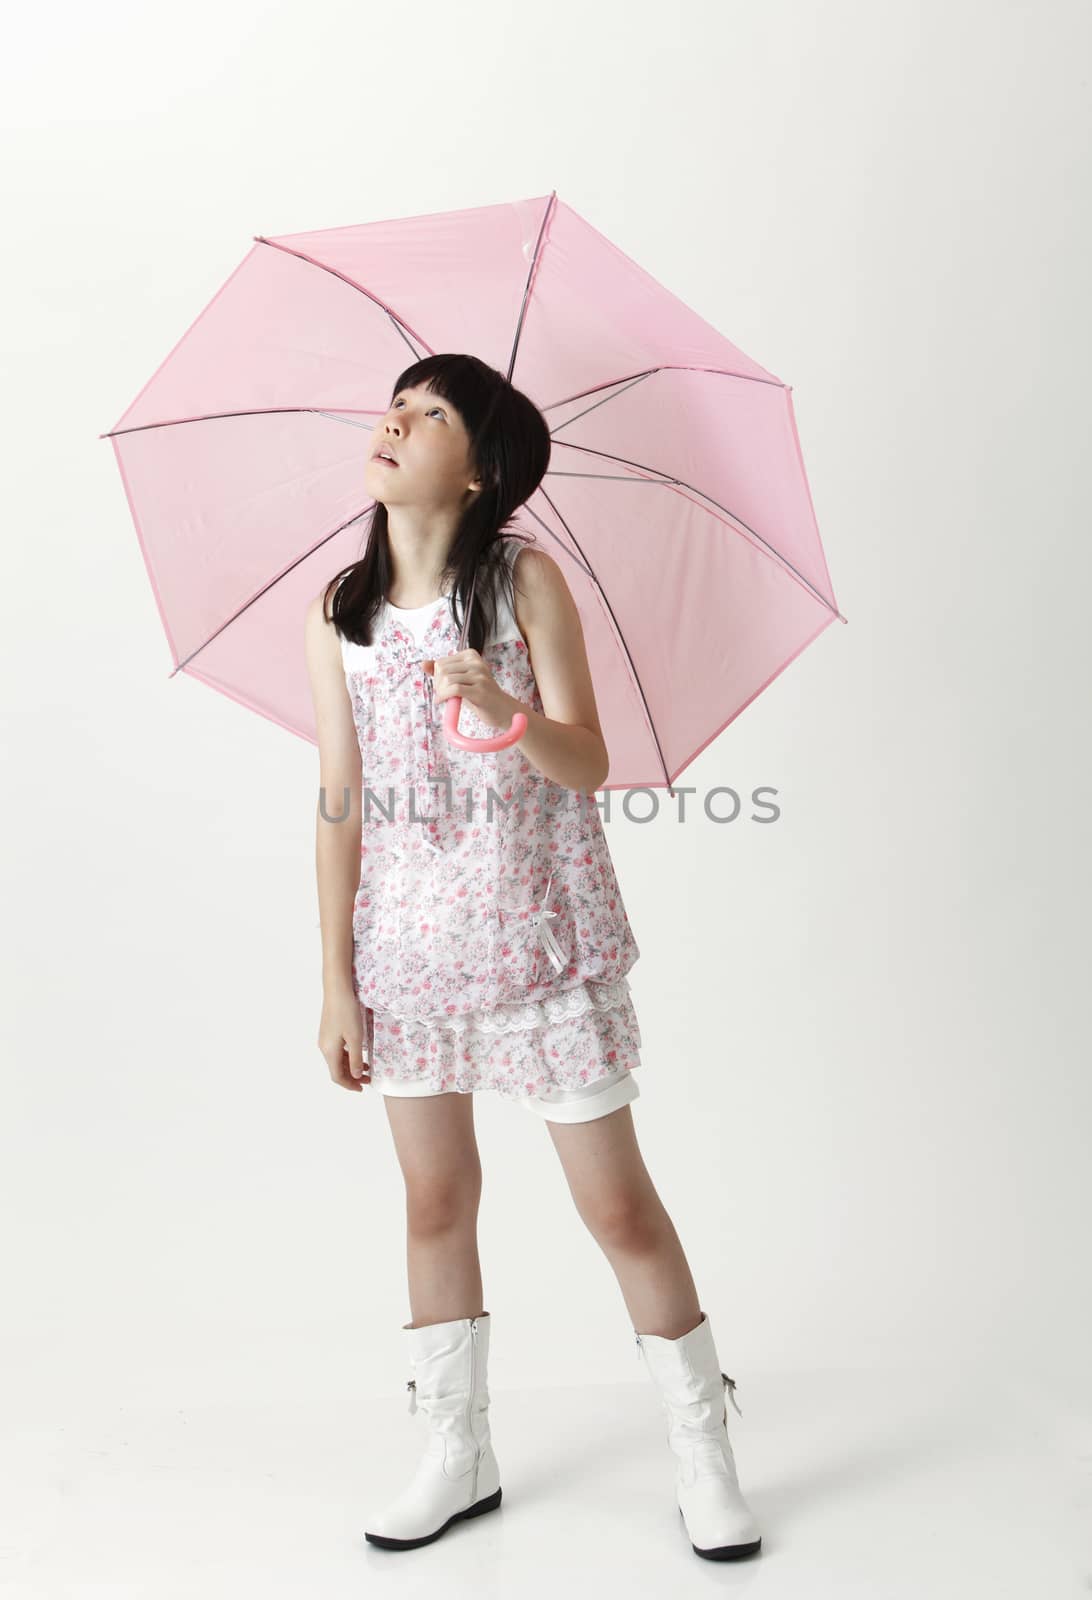 chinese girl holding a pink umbrella